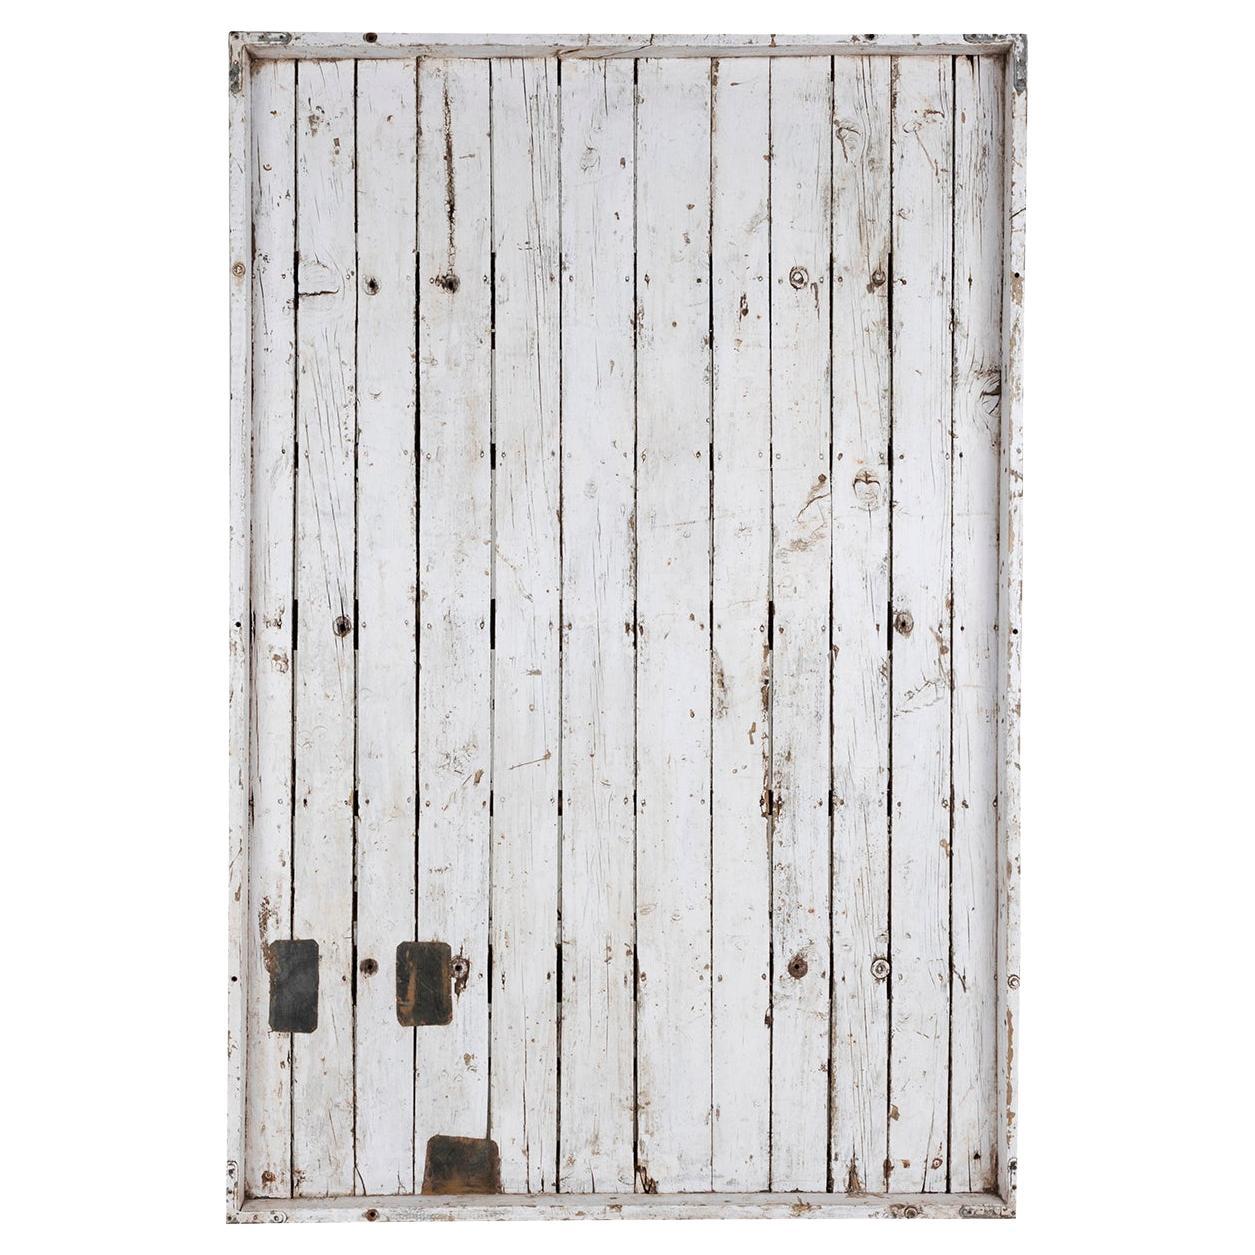 Reclaimed Wood Panel in Original White Paint Patina  For Sale